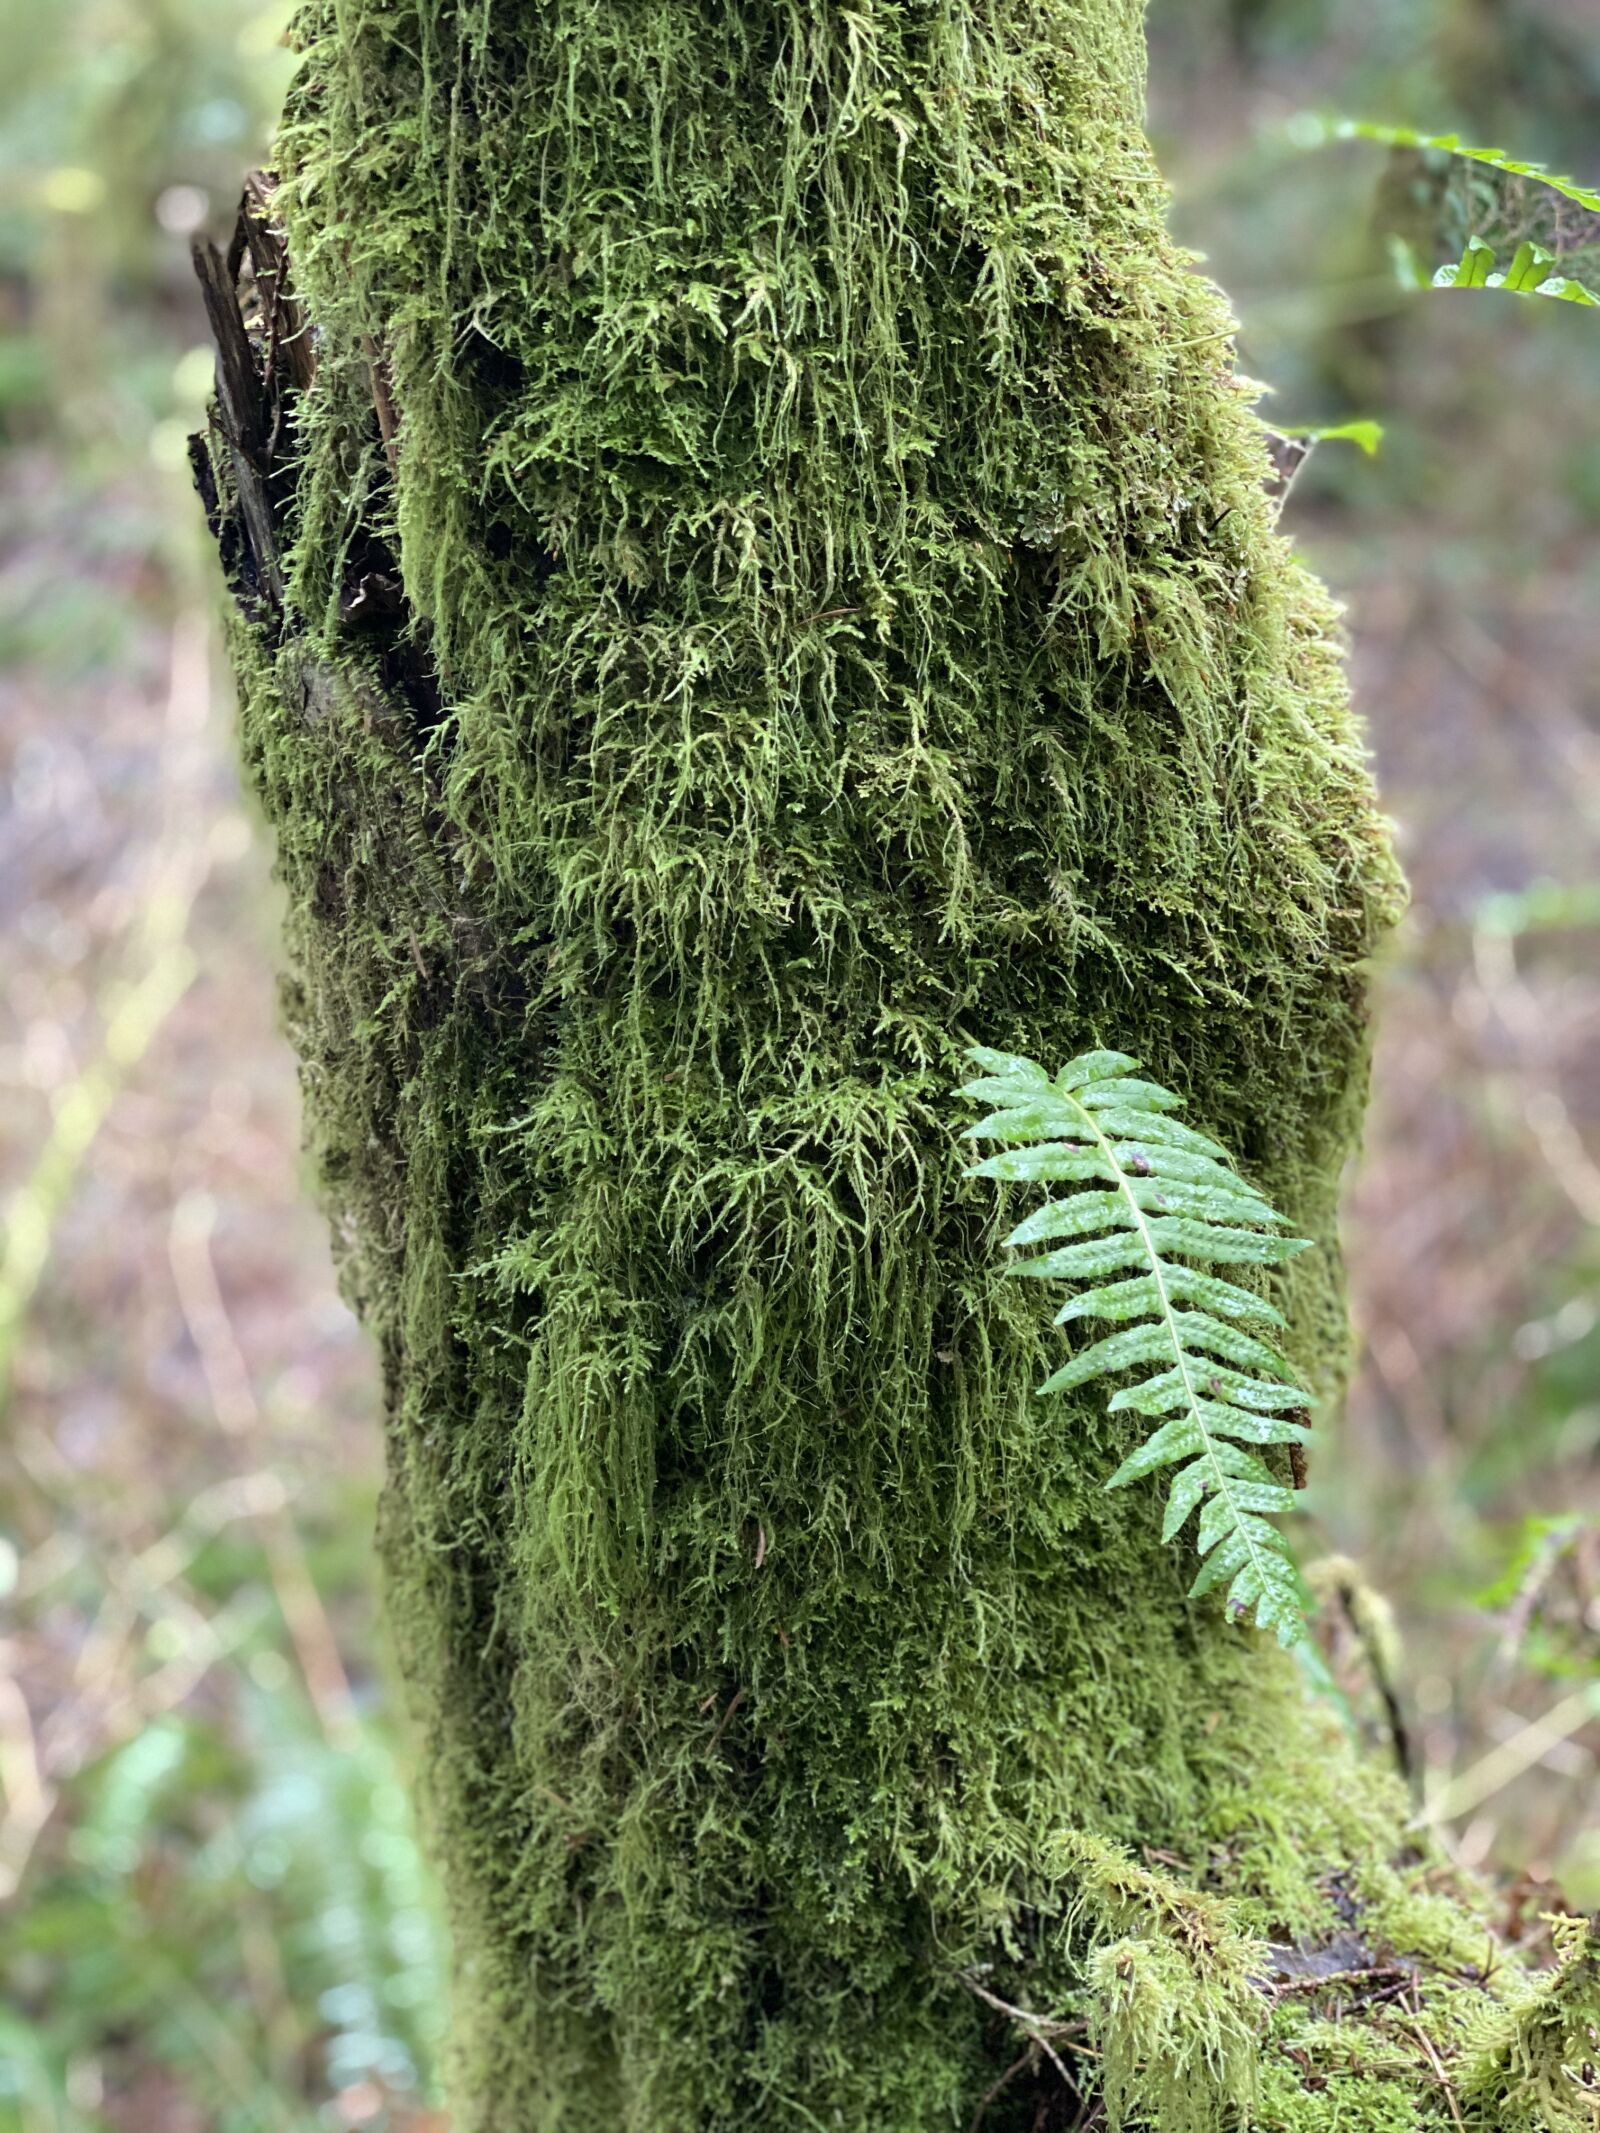 Apple iPhone 11 Pro Max + iPhone 11 Pro Max back dual camera 6mm f/2 sample photo. Fern, moss, green photography